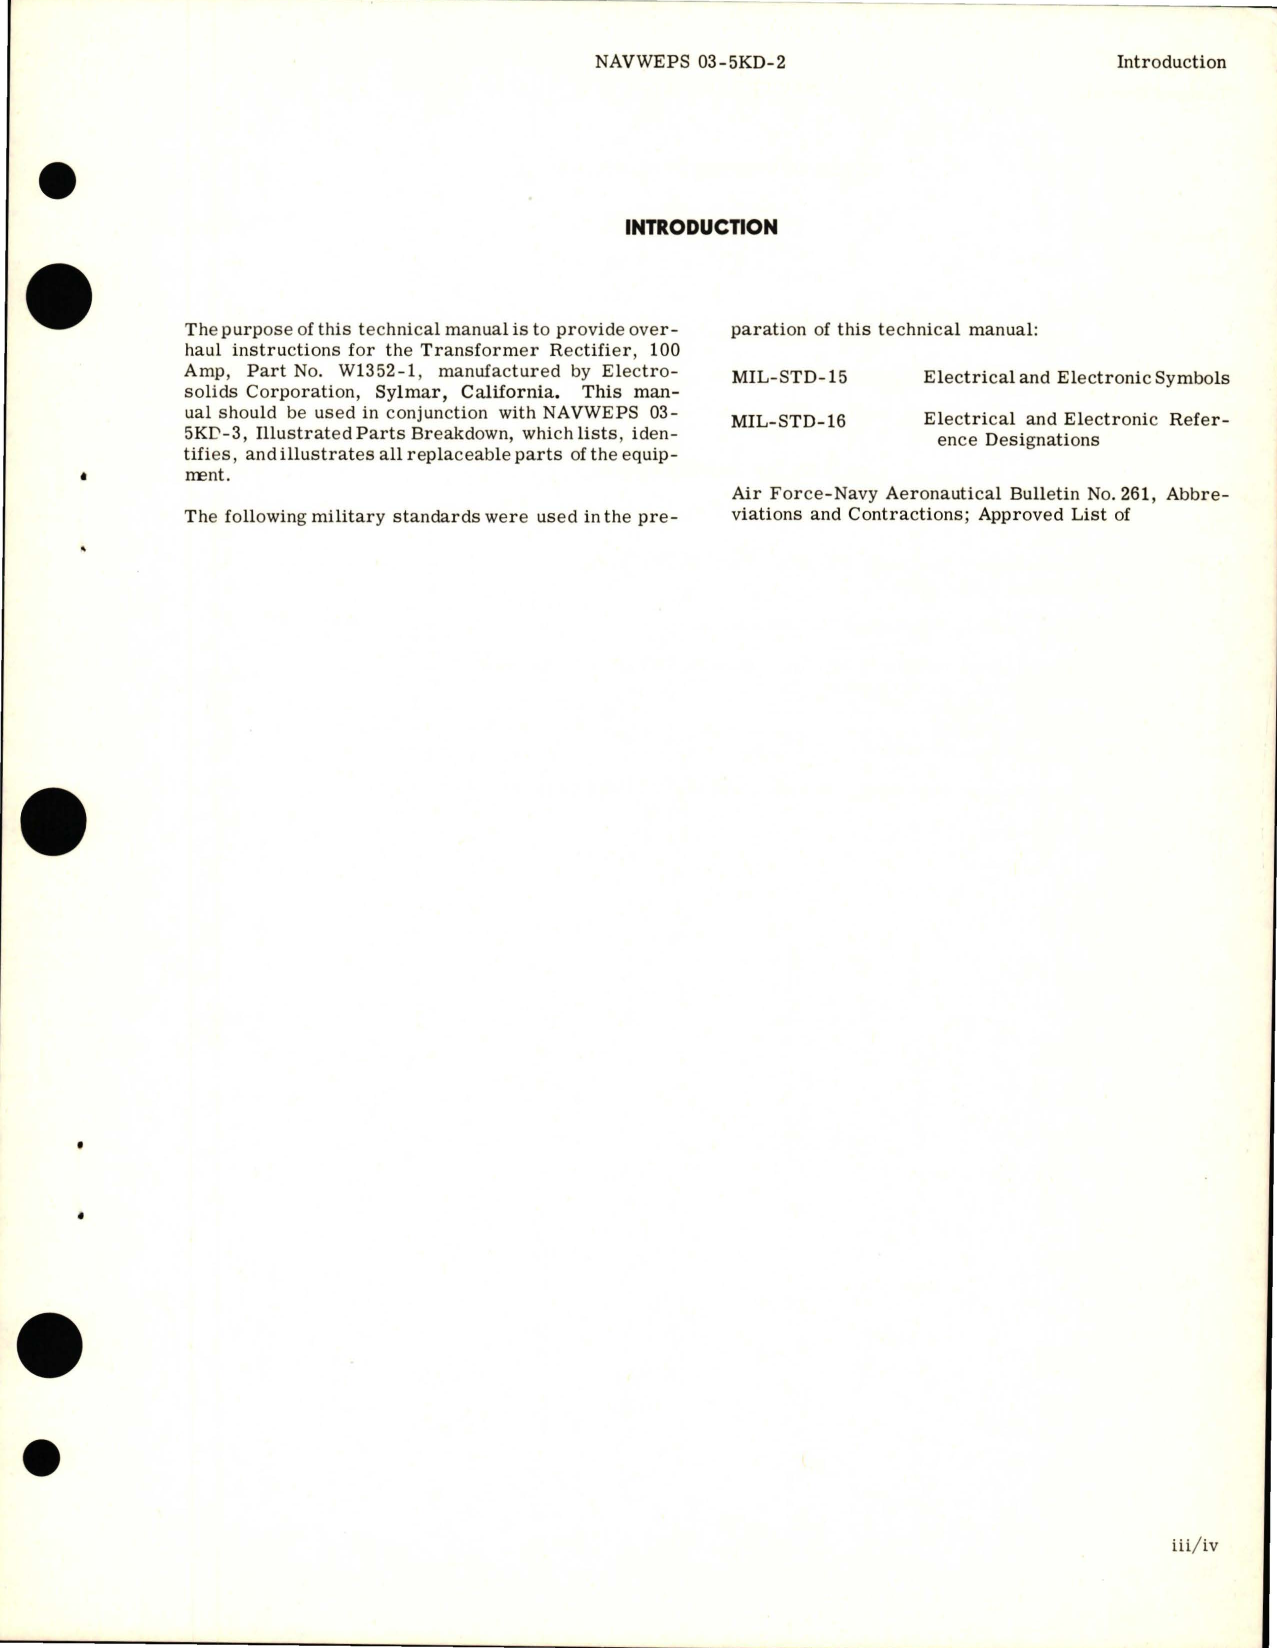 Sample page 5 from AirCorps Library document: Overhaul Instructions for Transformer Rectifier - Part W1352-1